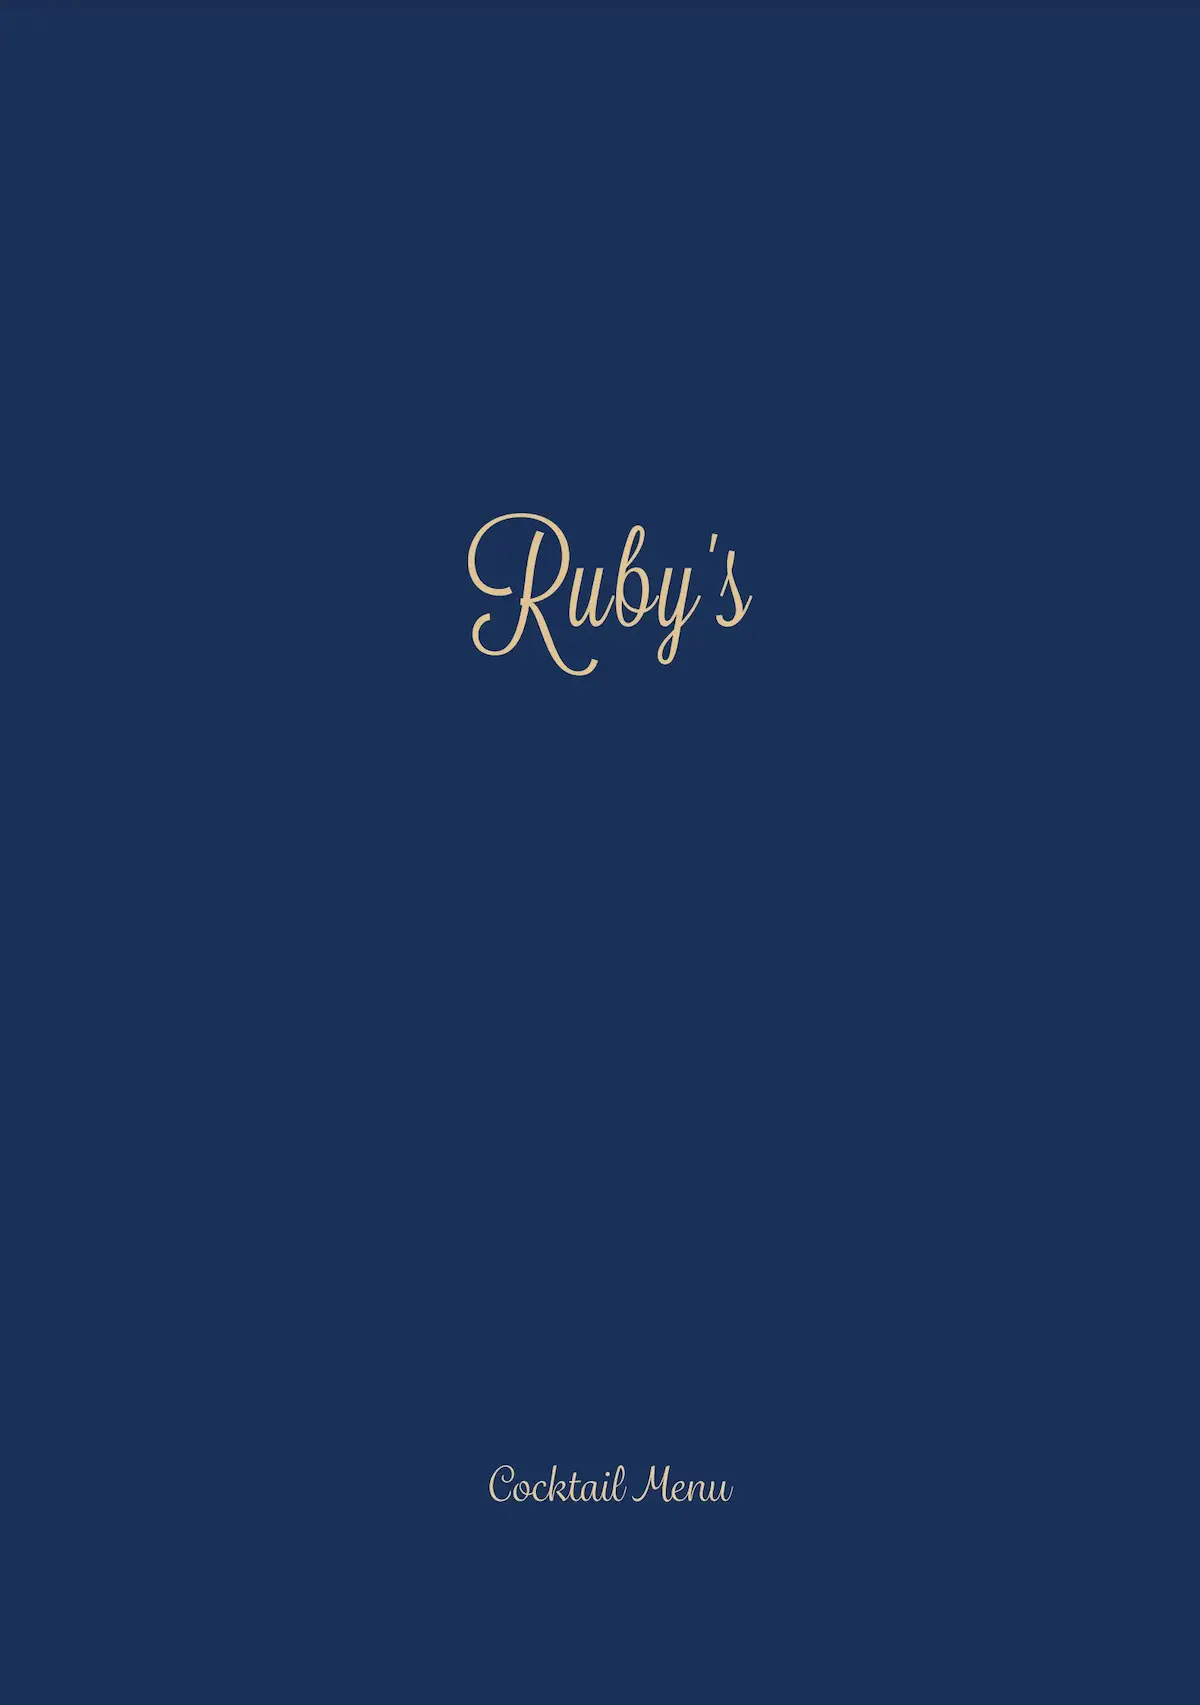 Cover of the Ruby's cocktail menu